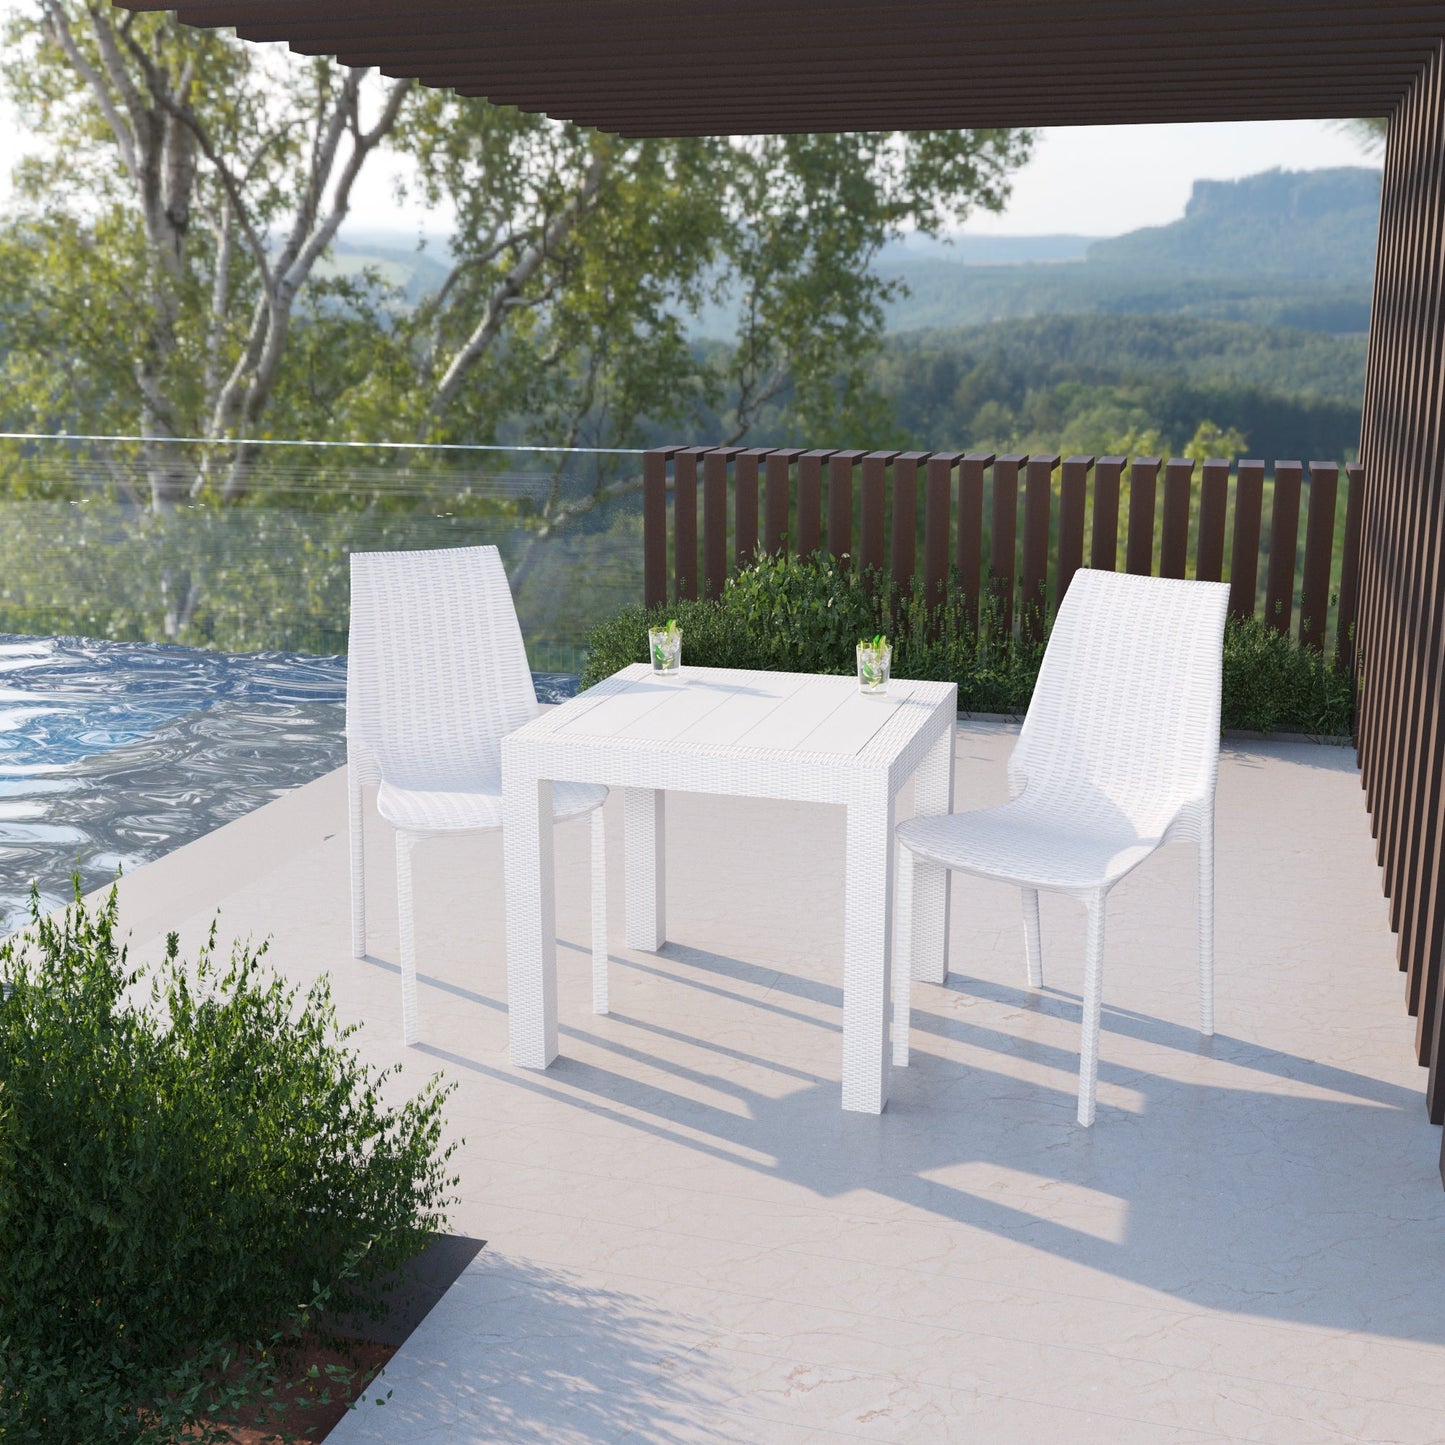 Anders Outdoor Patio Plastic Dining Chair - Set of 2